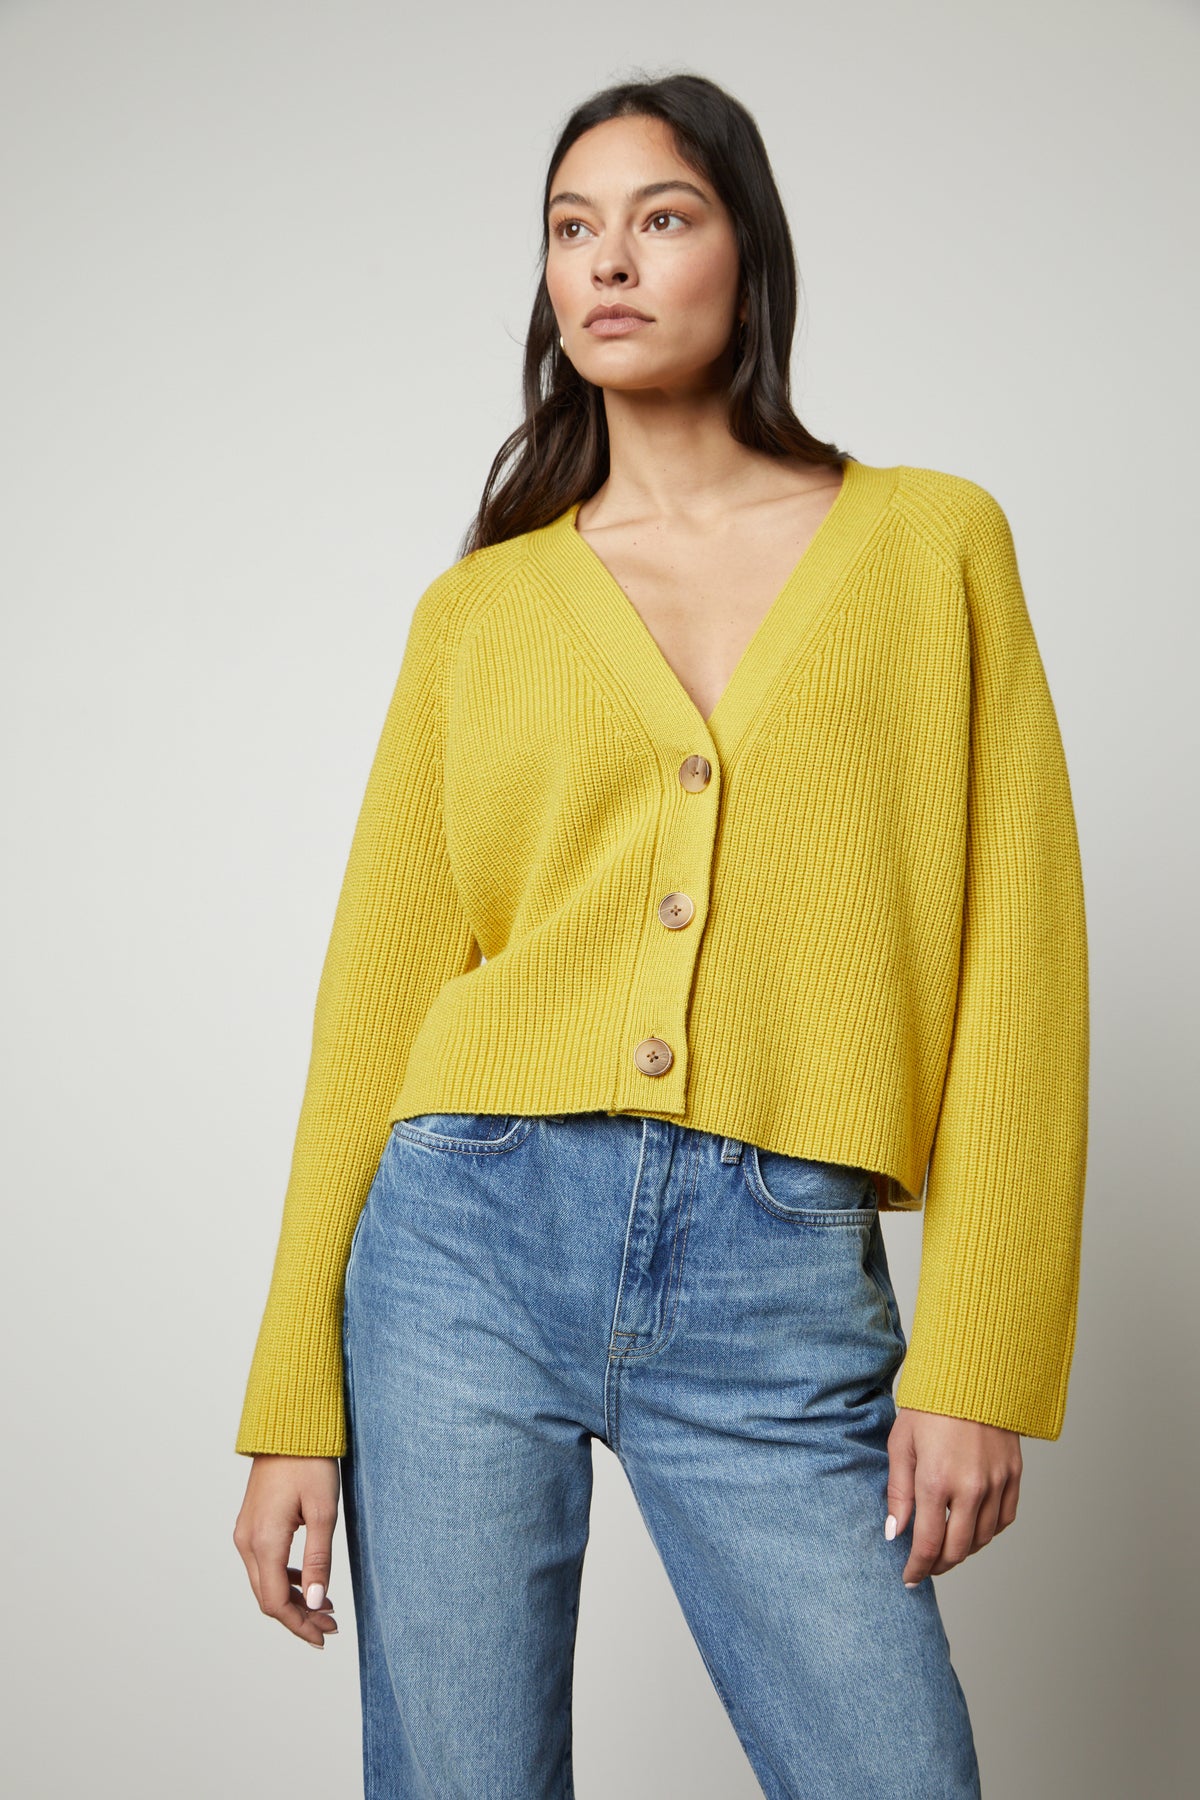   The model is wearing a yellow Marilyn Button Front Cardigan by Velvet by Graham & Spencer and jeans. 